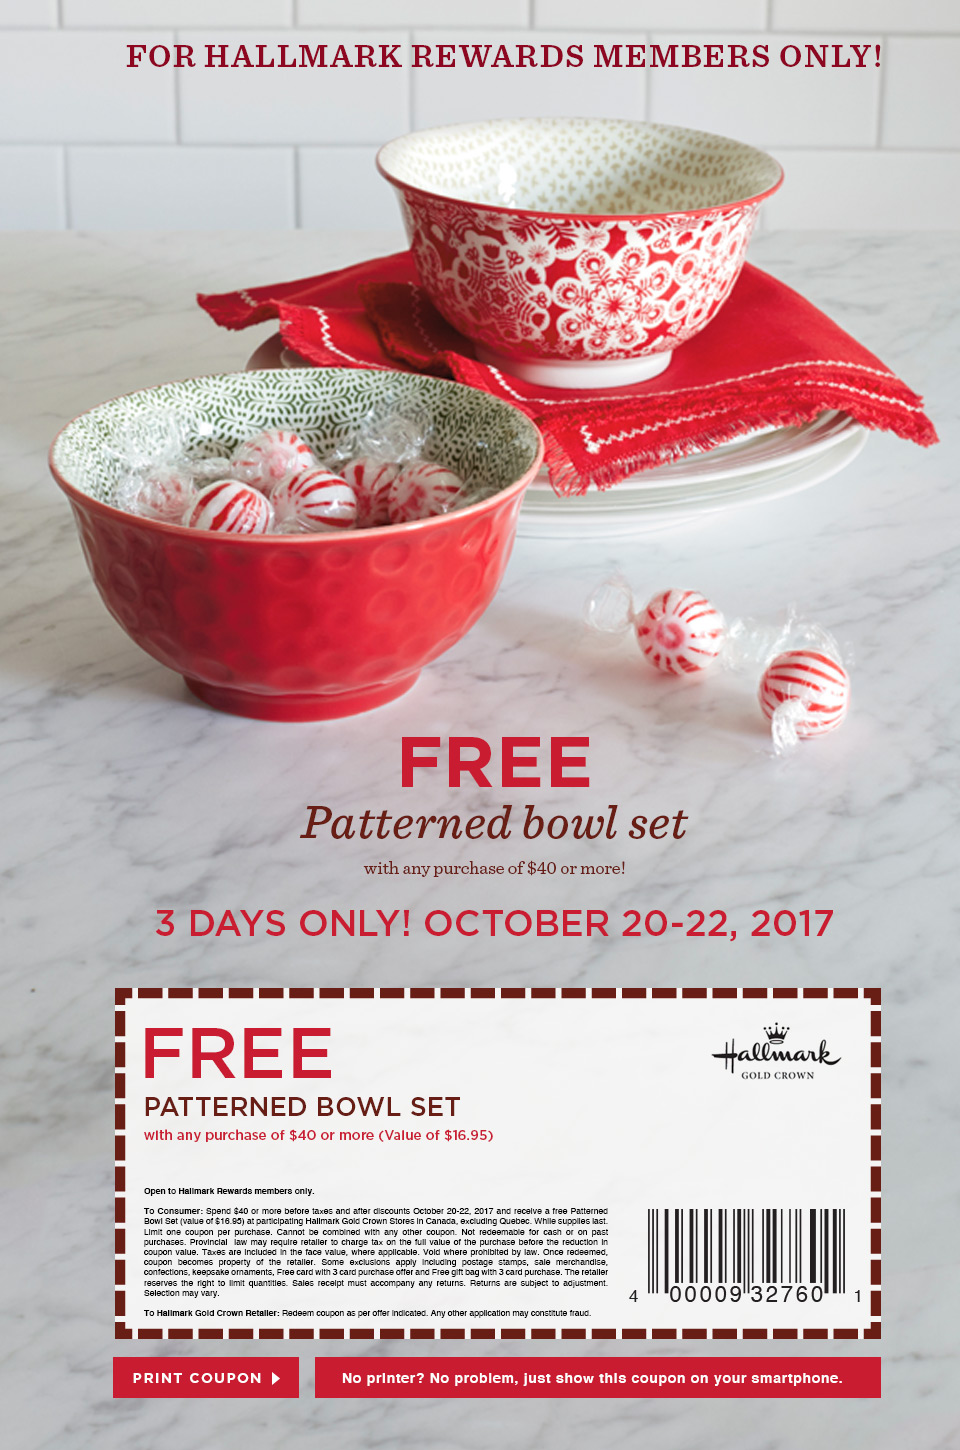 FREE Patterned bowl set - For Hallmark Rewards members only!